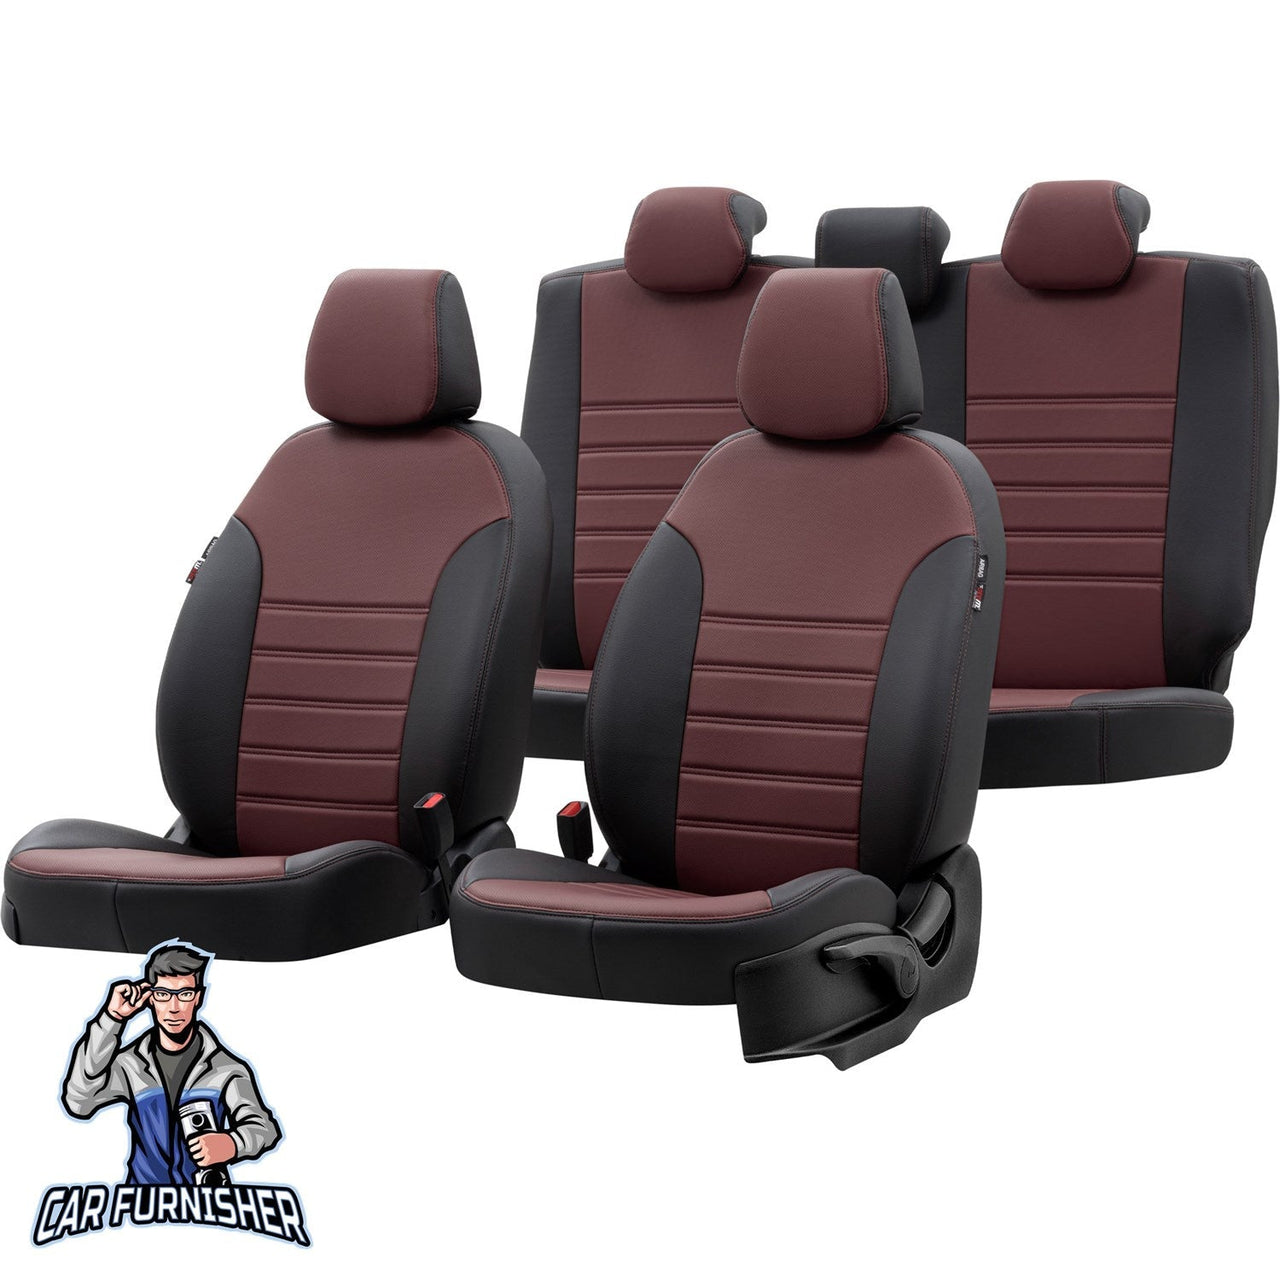 Mitsubishi Space Star Seat Cover Istanbul Leather Design Burgundy Leather